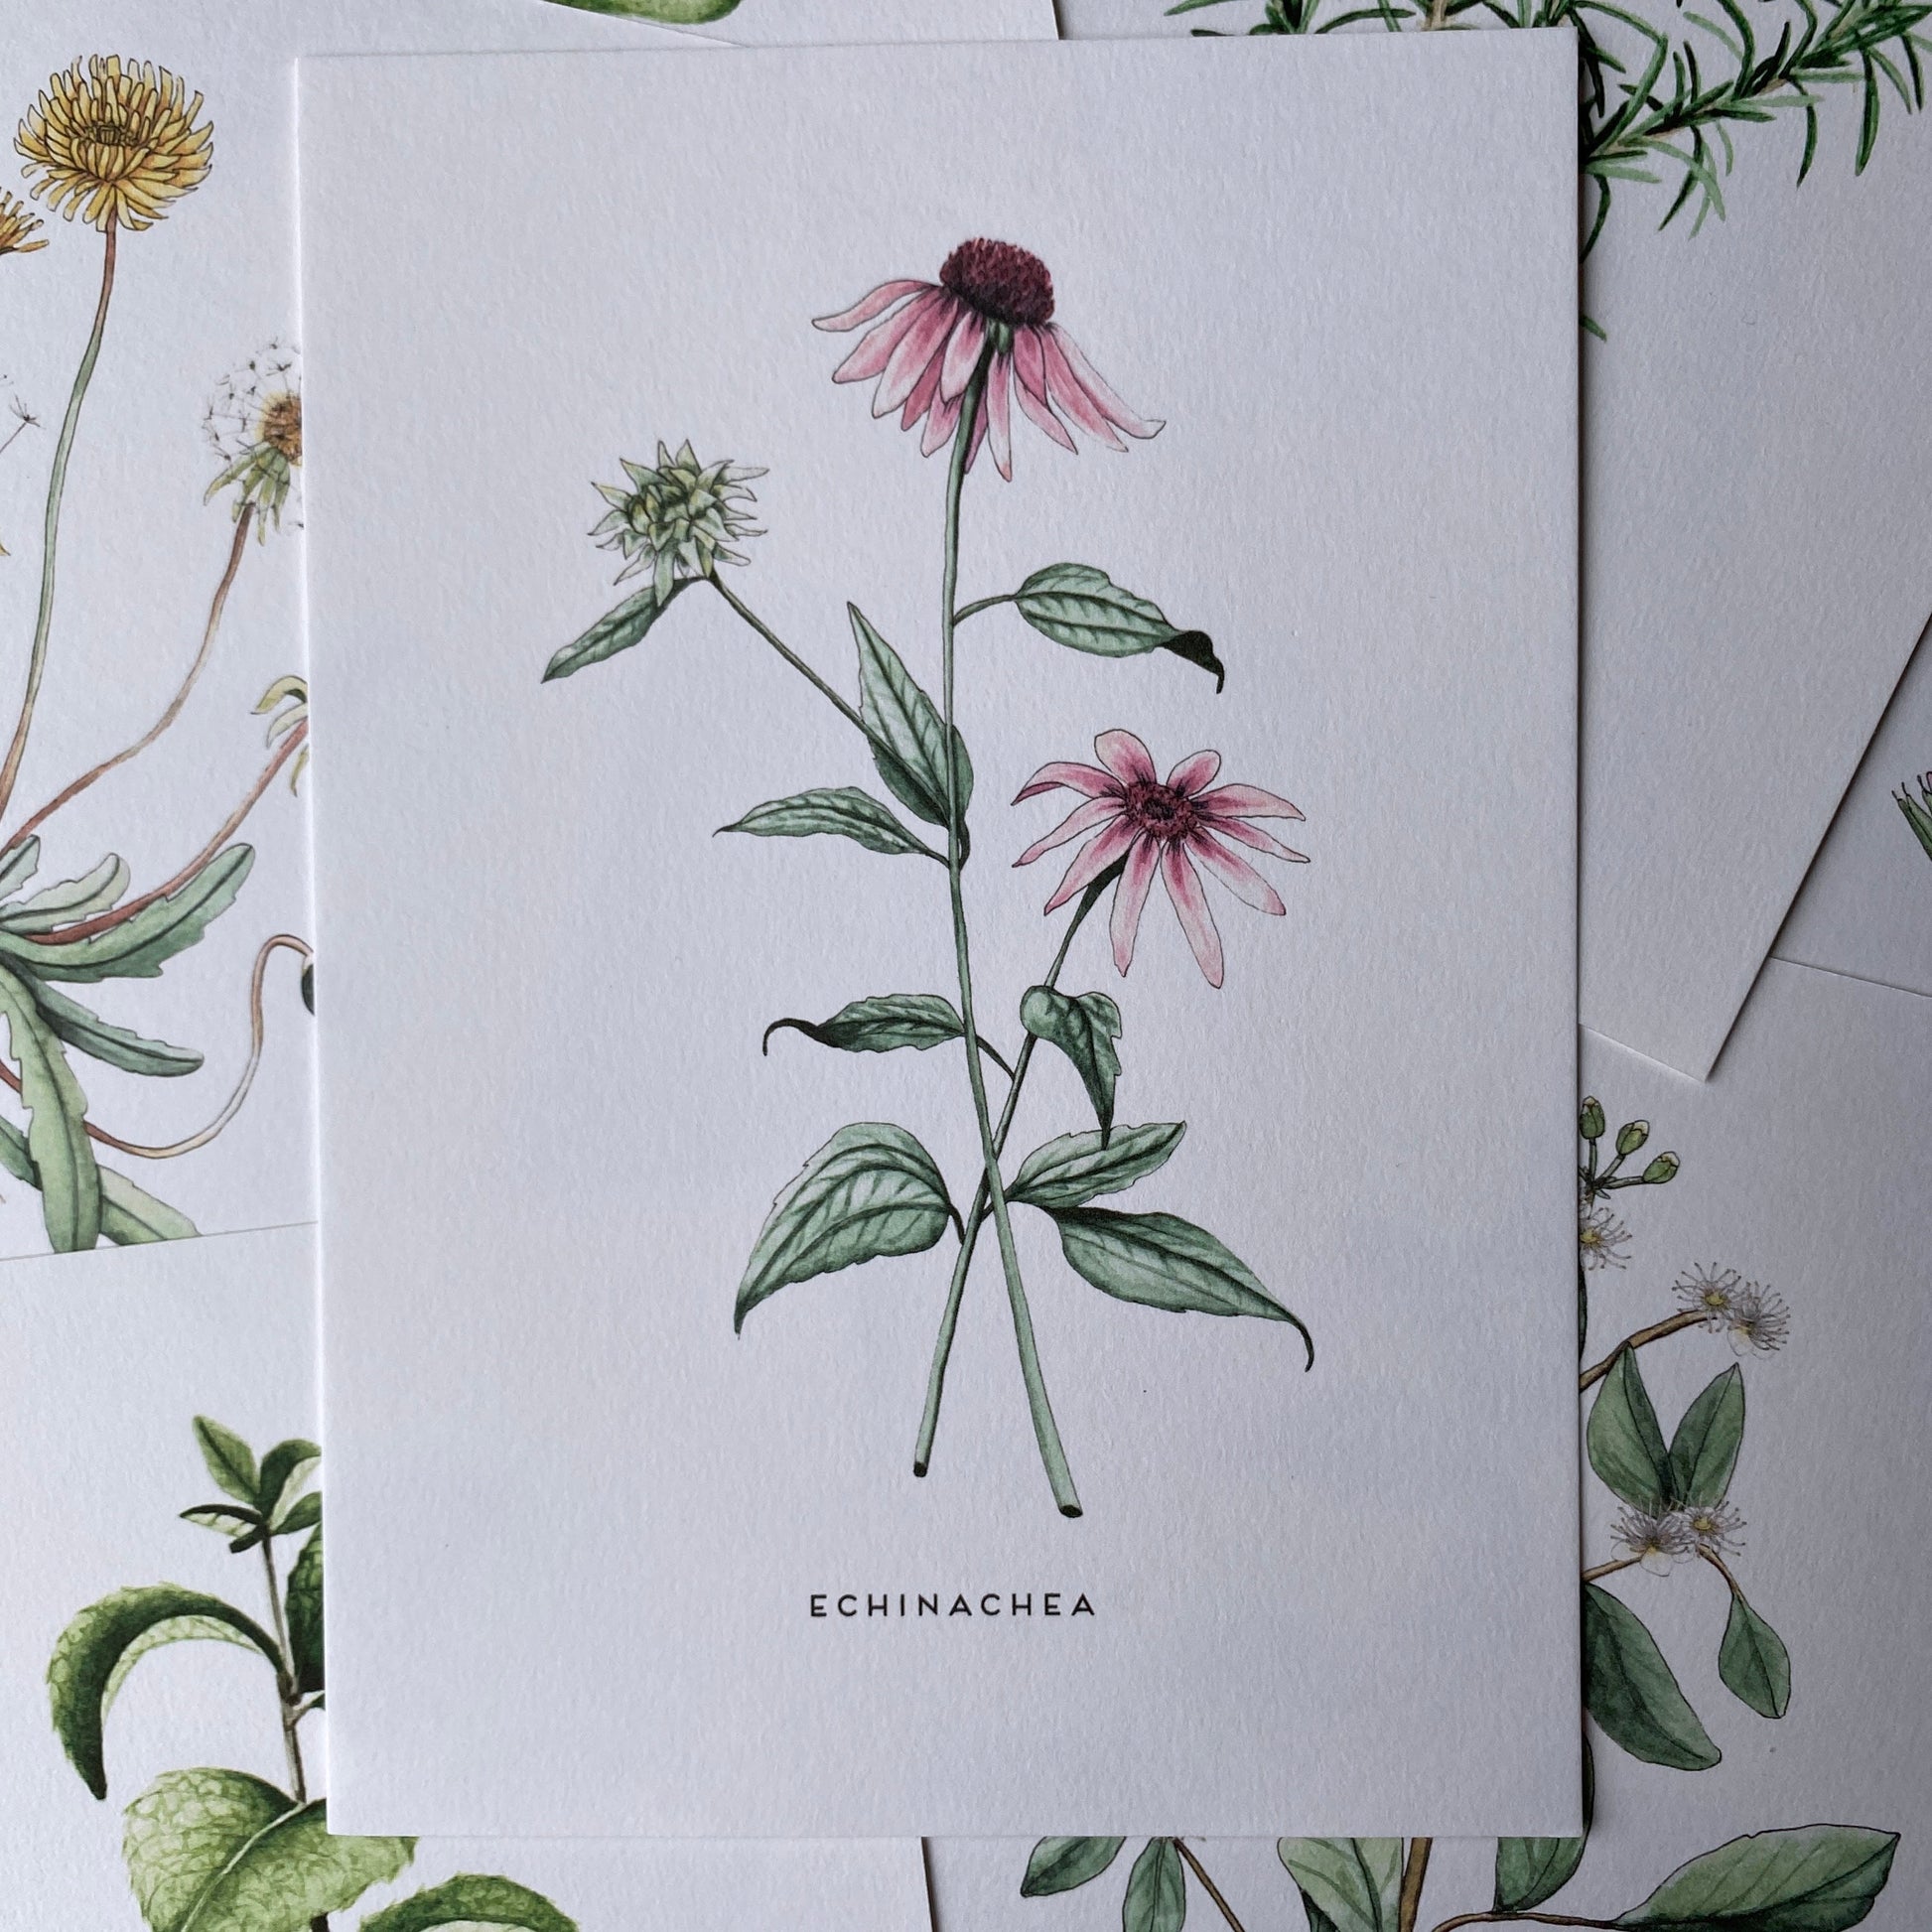 A5 art print of a watercolour echinachea, a pretty pink flower with green delicate leaves